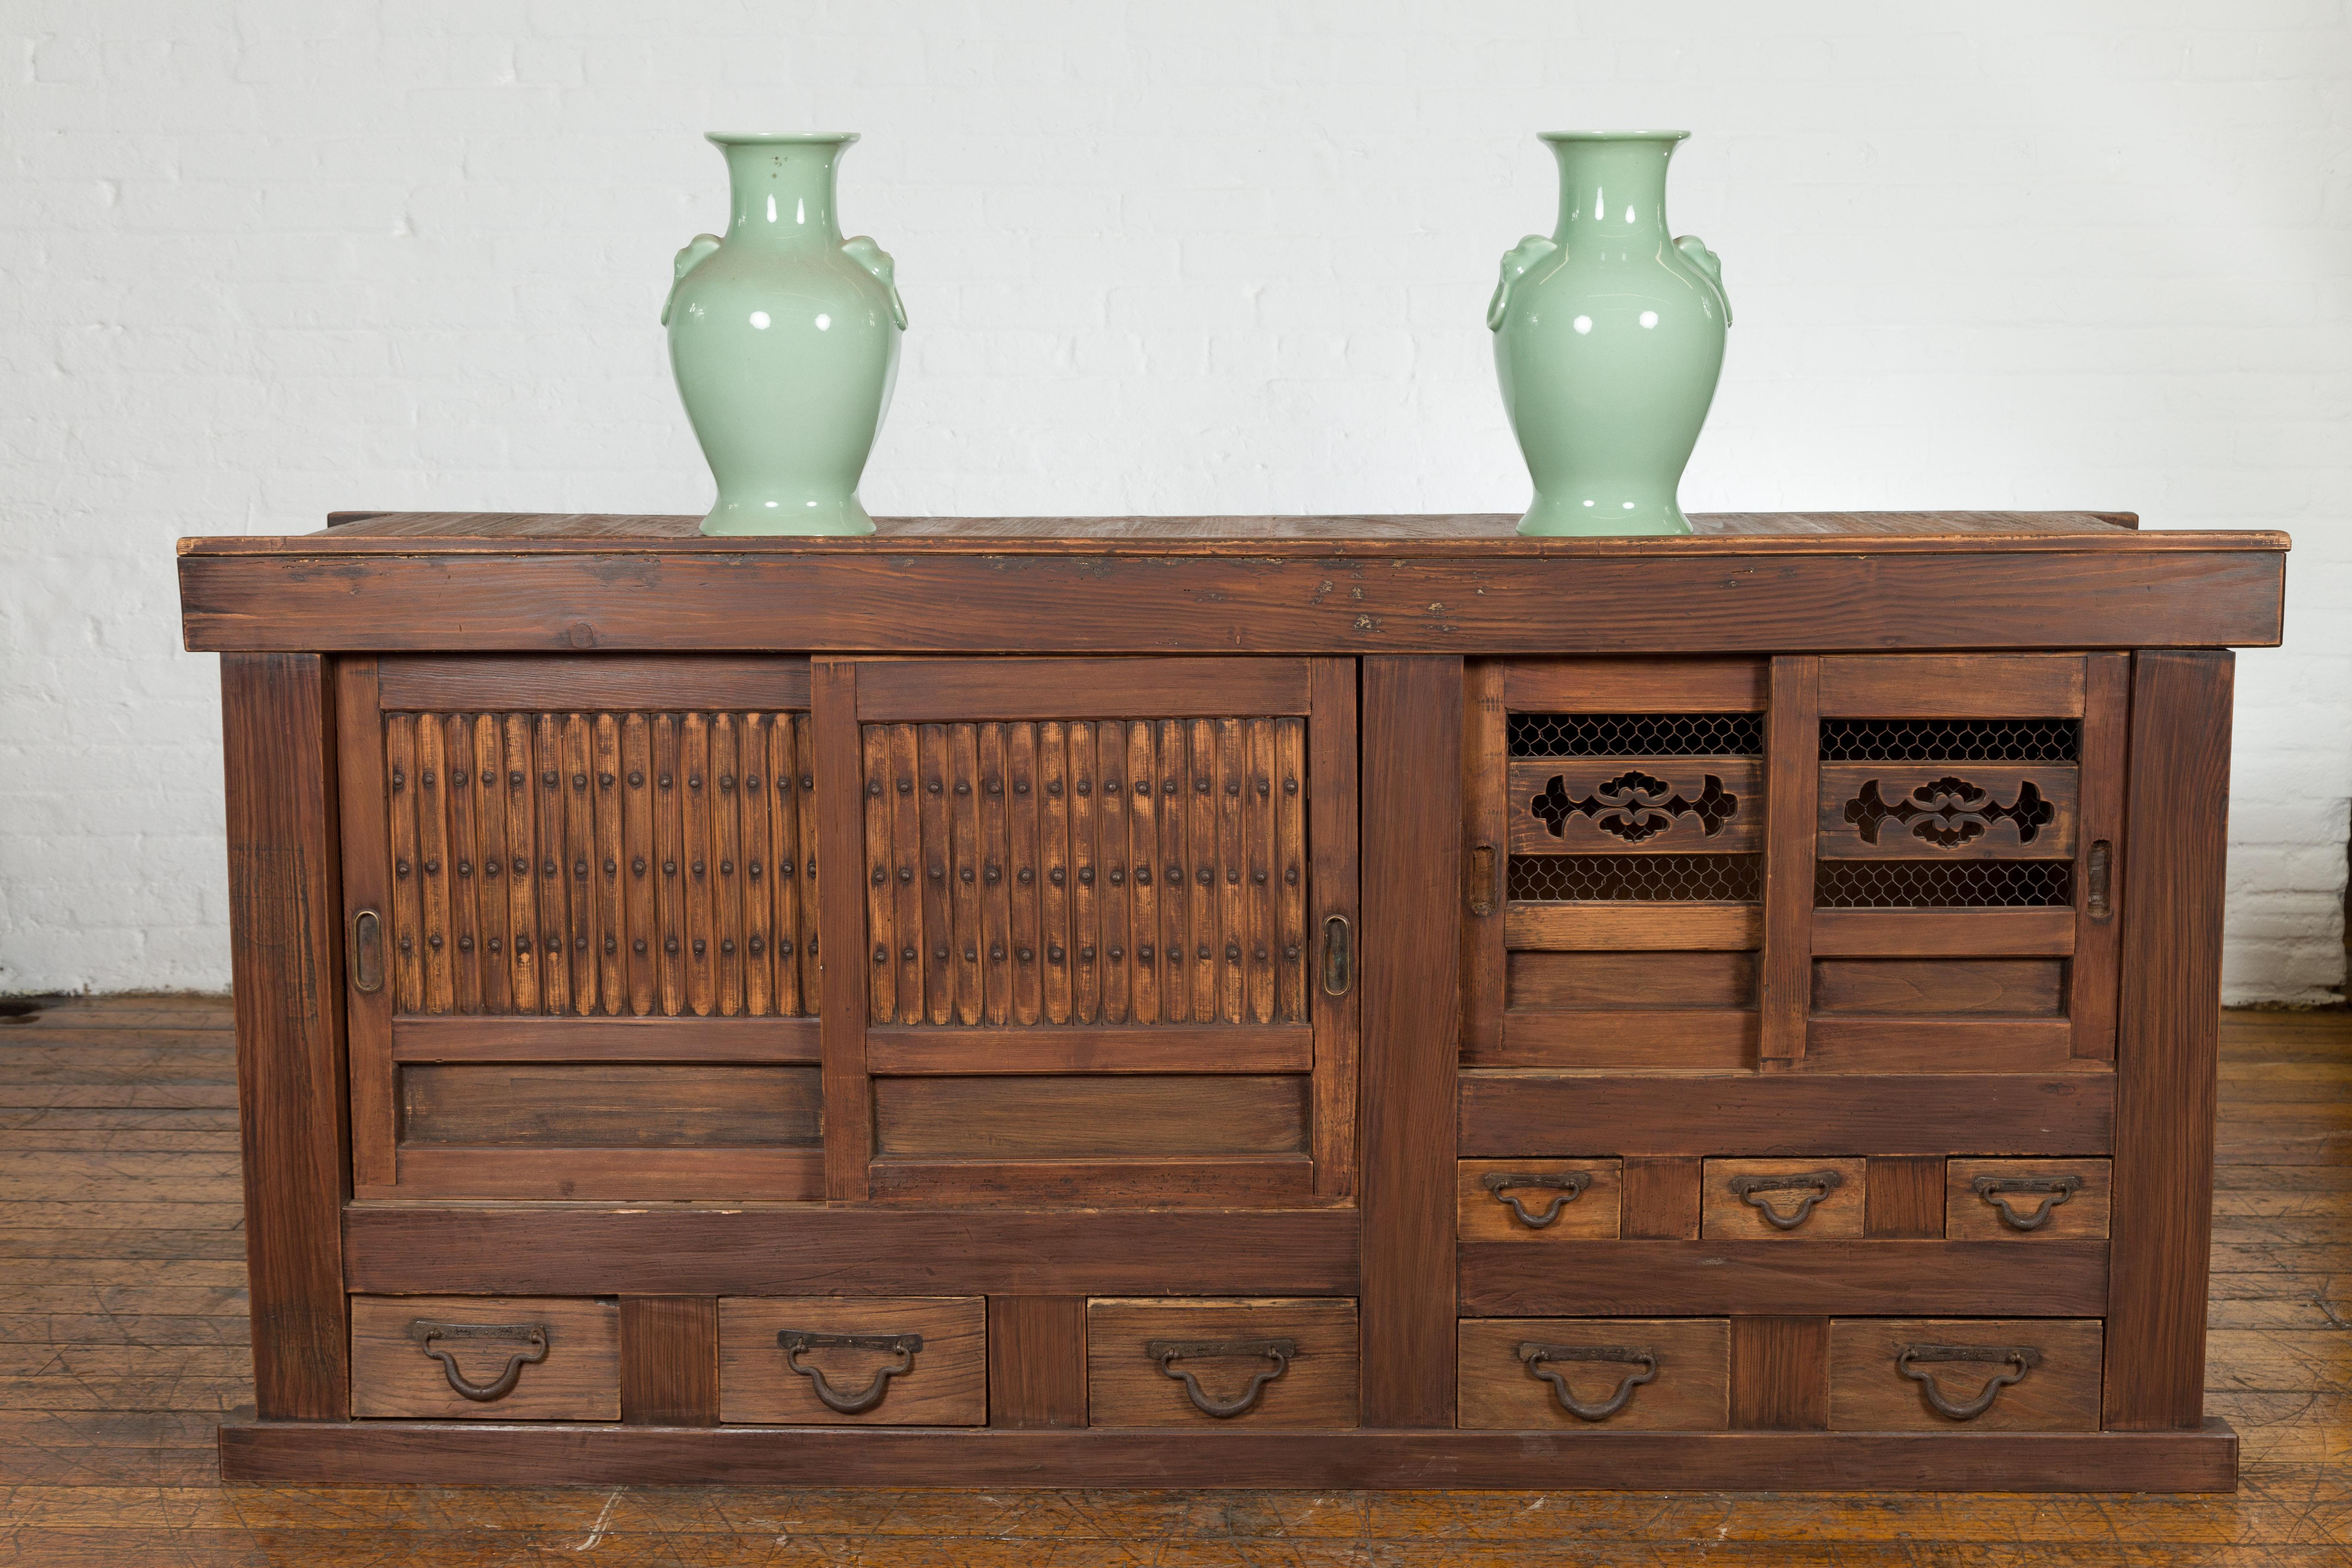 Carved Japanese Meiji Period 19th Century Mizuya Kitchen Cabinet with Doors and Drawers